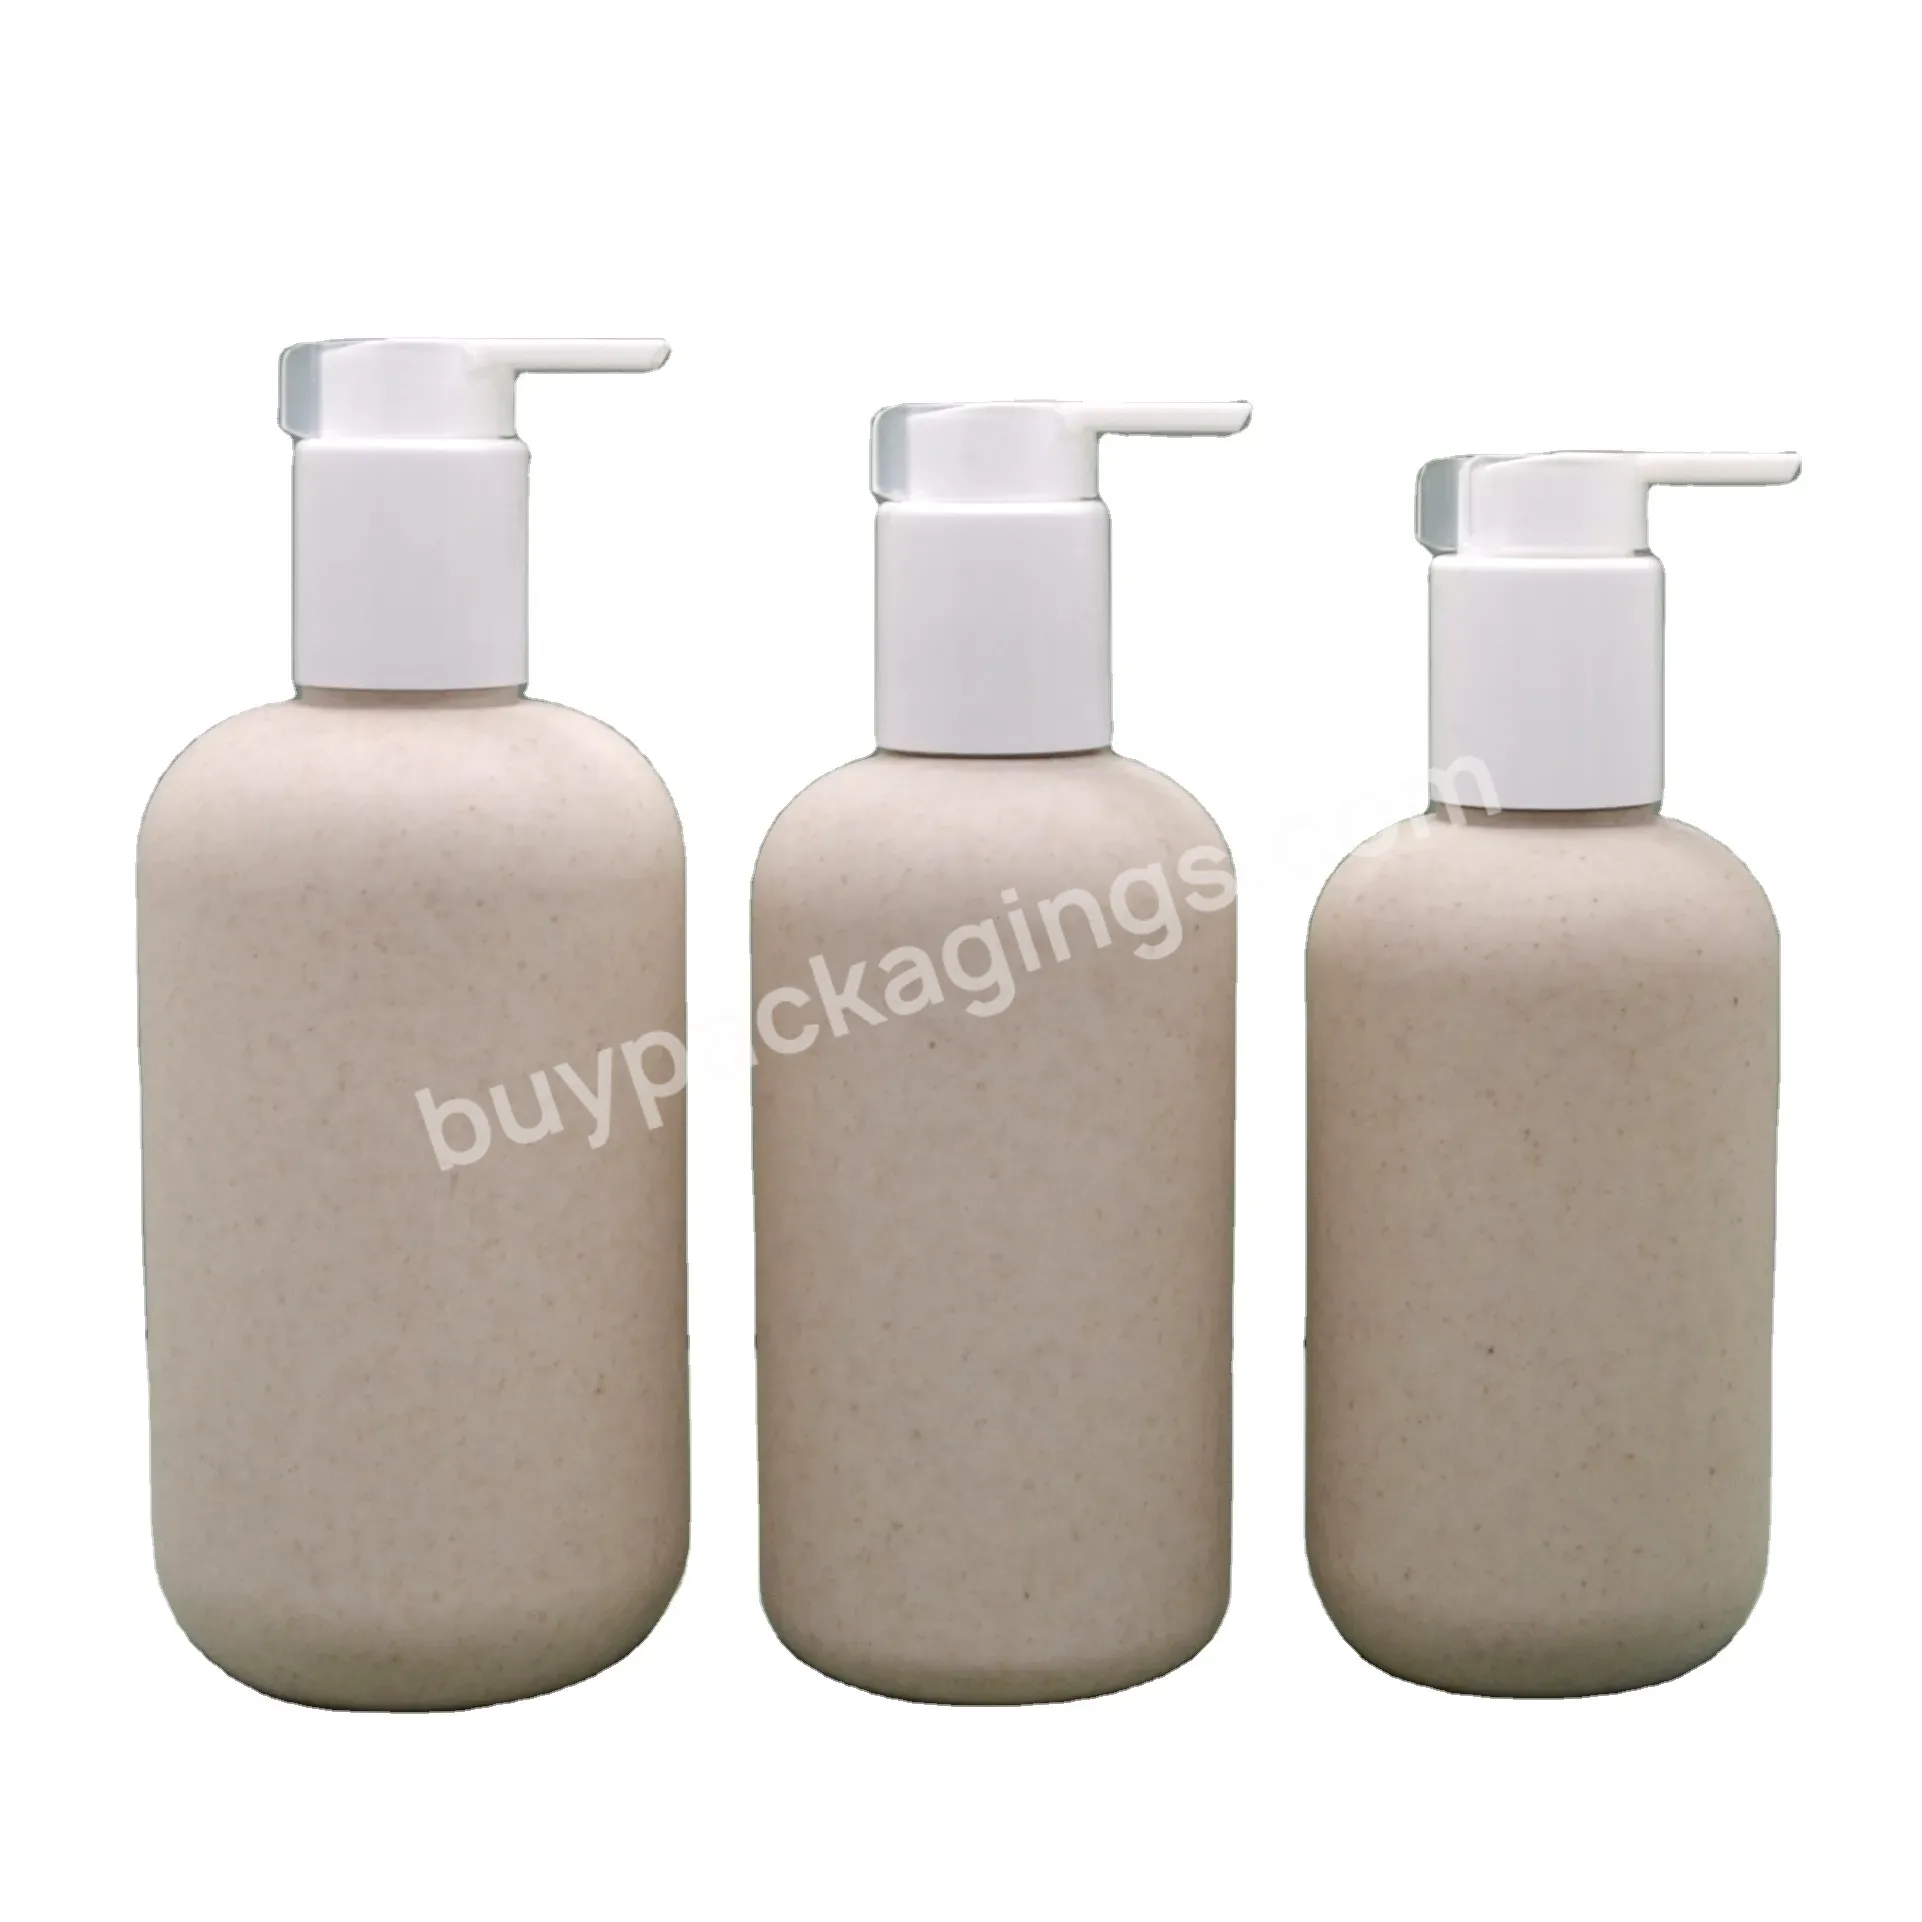 Cosmetic Packaging 250ml 300ml 400ml Wheat Straw Biodegradable Shampoo Pe Plastic Pump Bottle With Lotion Dispenser - Buy Wheat Straw Plastic Round Shampoo Bottle,Eco-friendly Biodegradable 250ml 300ml 400ml Wheat Straw Plastic Pump Bottle For Hair C